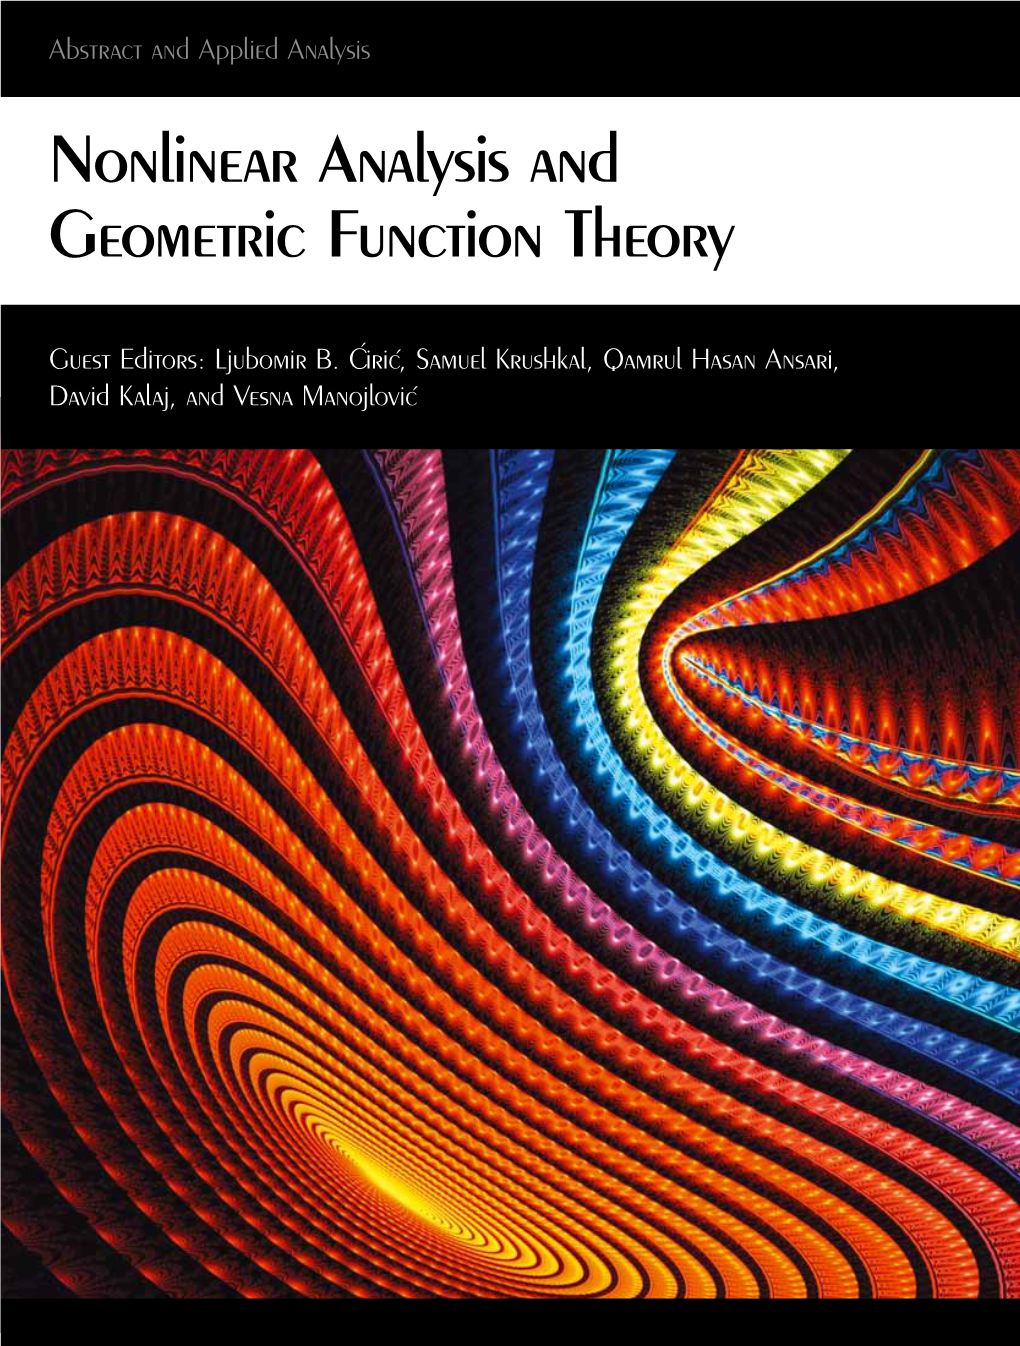 Nonlinear Analysis and Geometric Function Theory